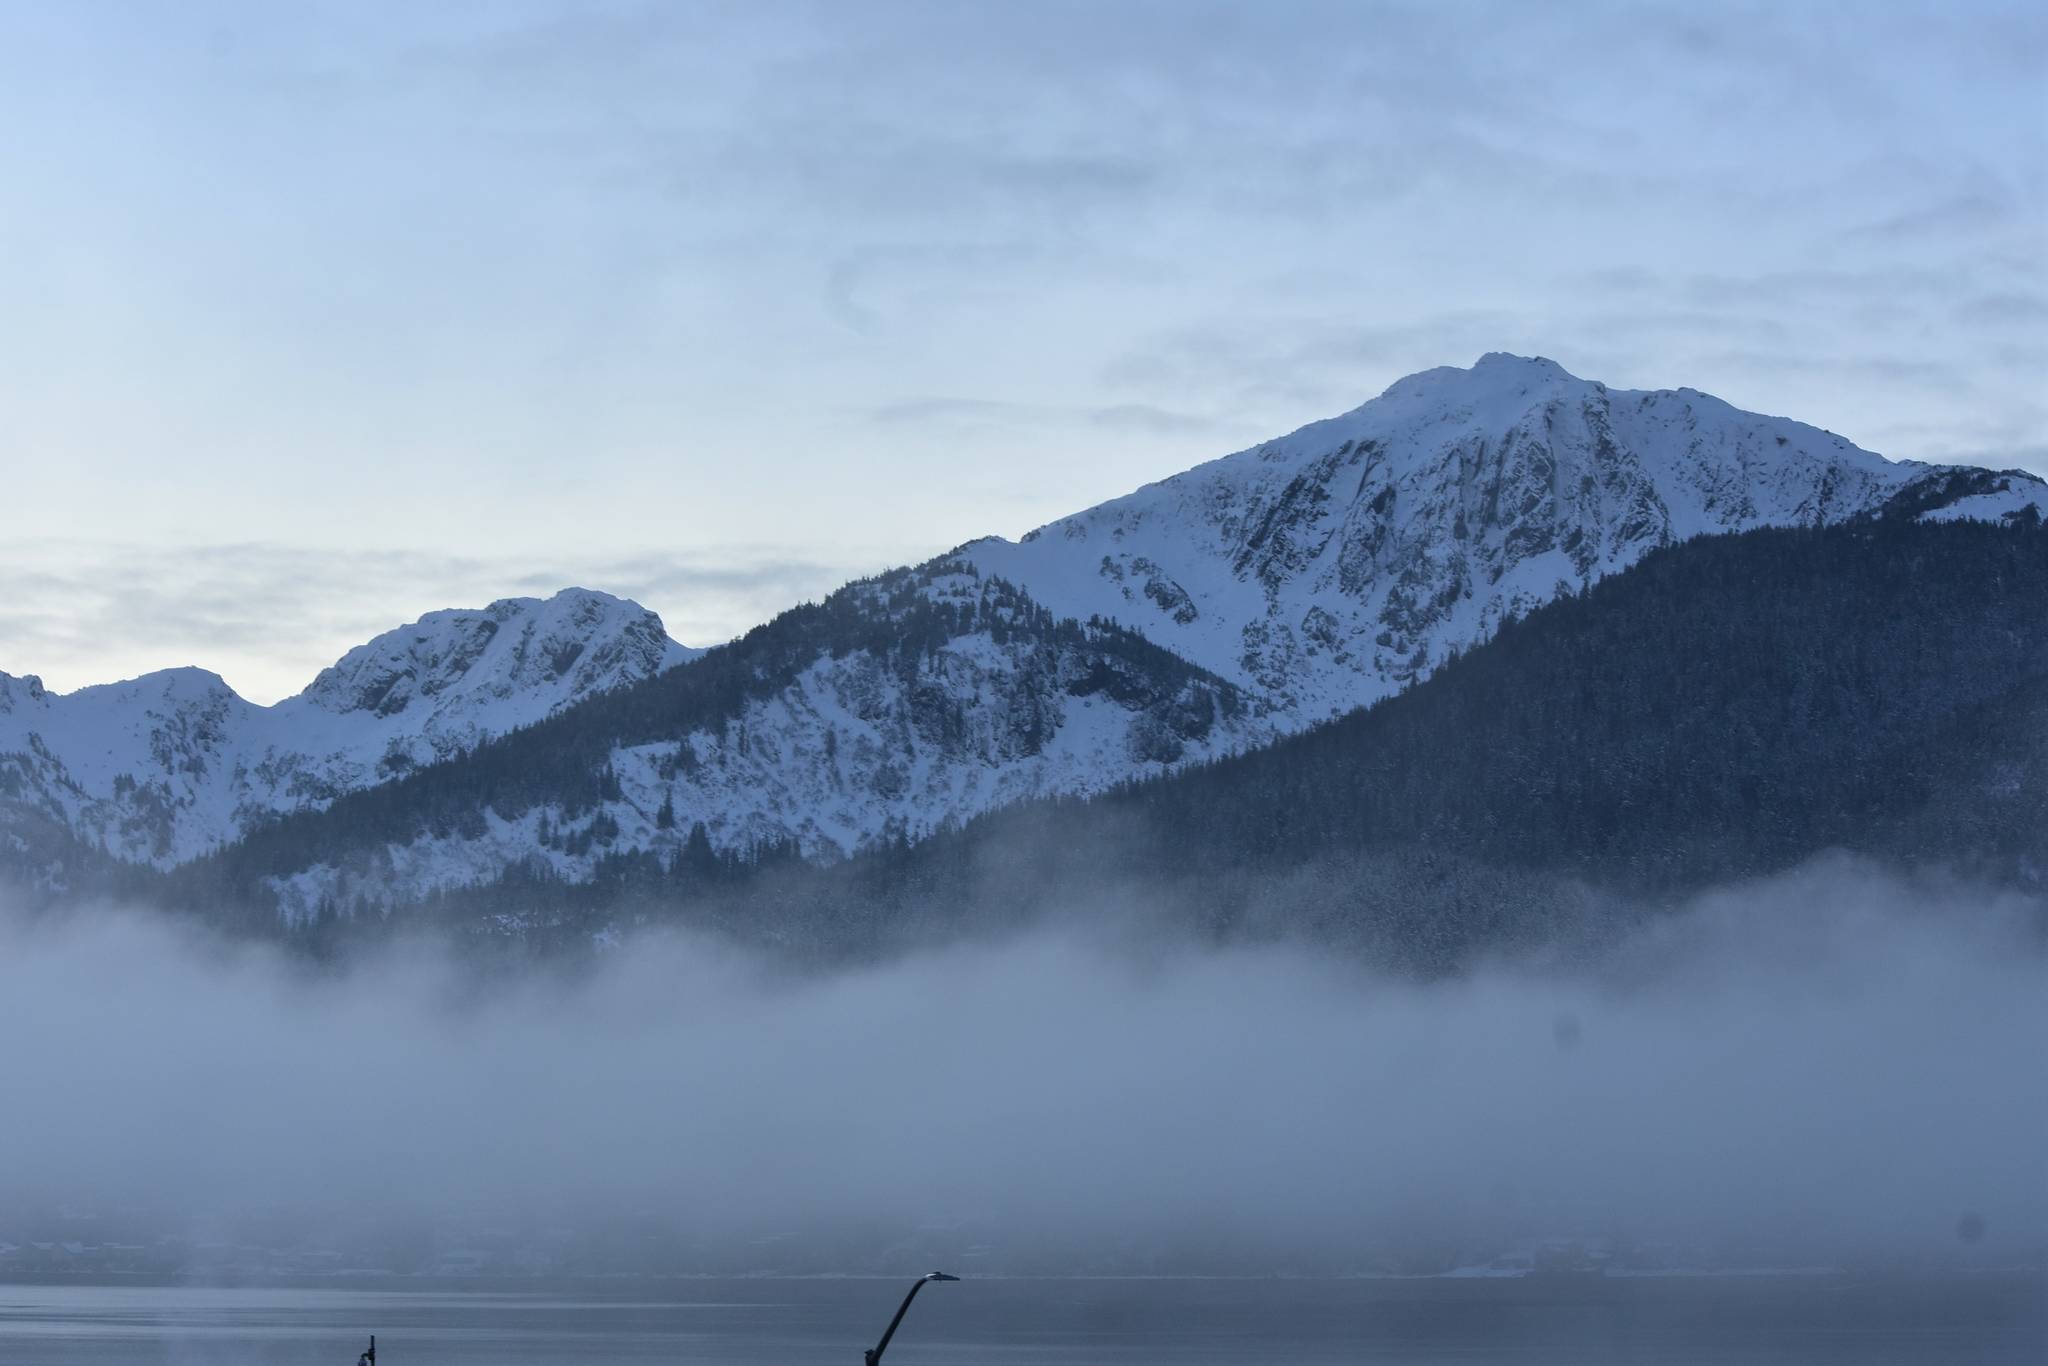 Peter Segall / Juneau Empire
Douglas Island, within the Tongass National Forest, breaks through the morning fog on Dec. 15. A federal investigation found the U.S. Forest Service violated federal law in 2018 when it appropriated a $2 million grant to Alaska for input on Roadless Rule changes.